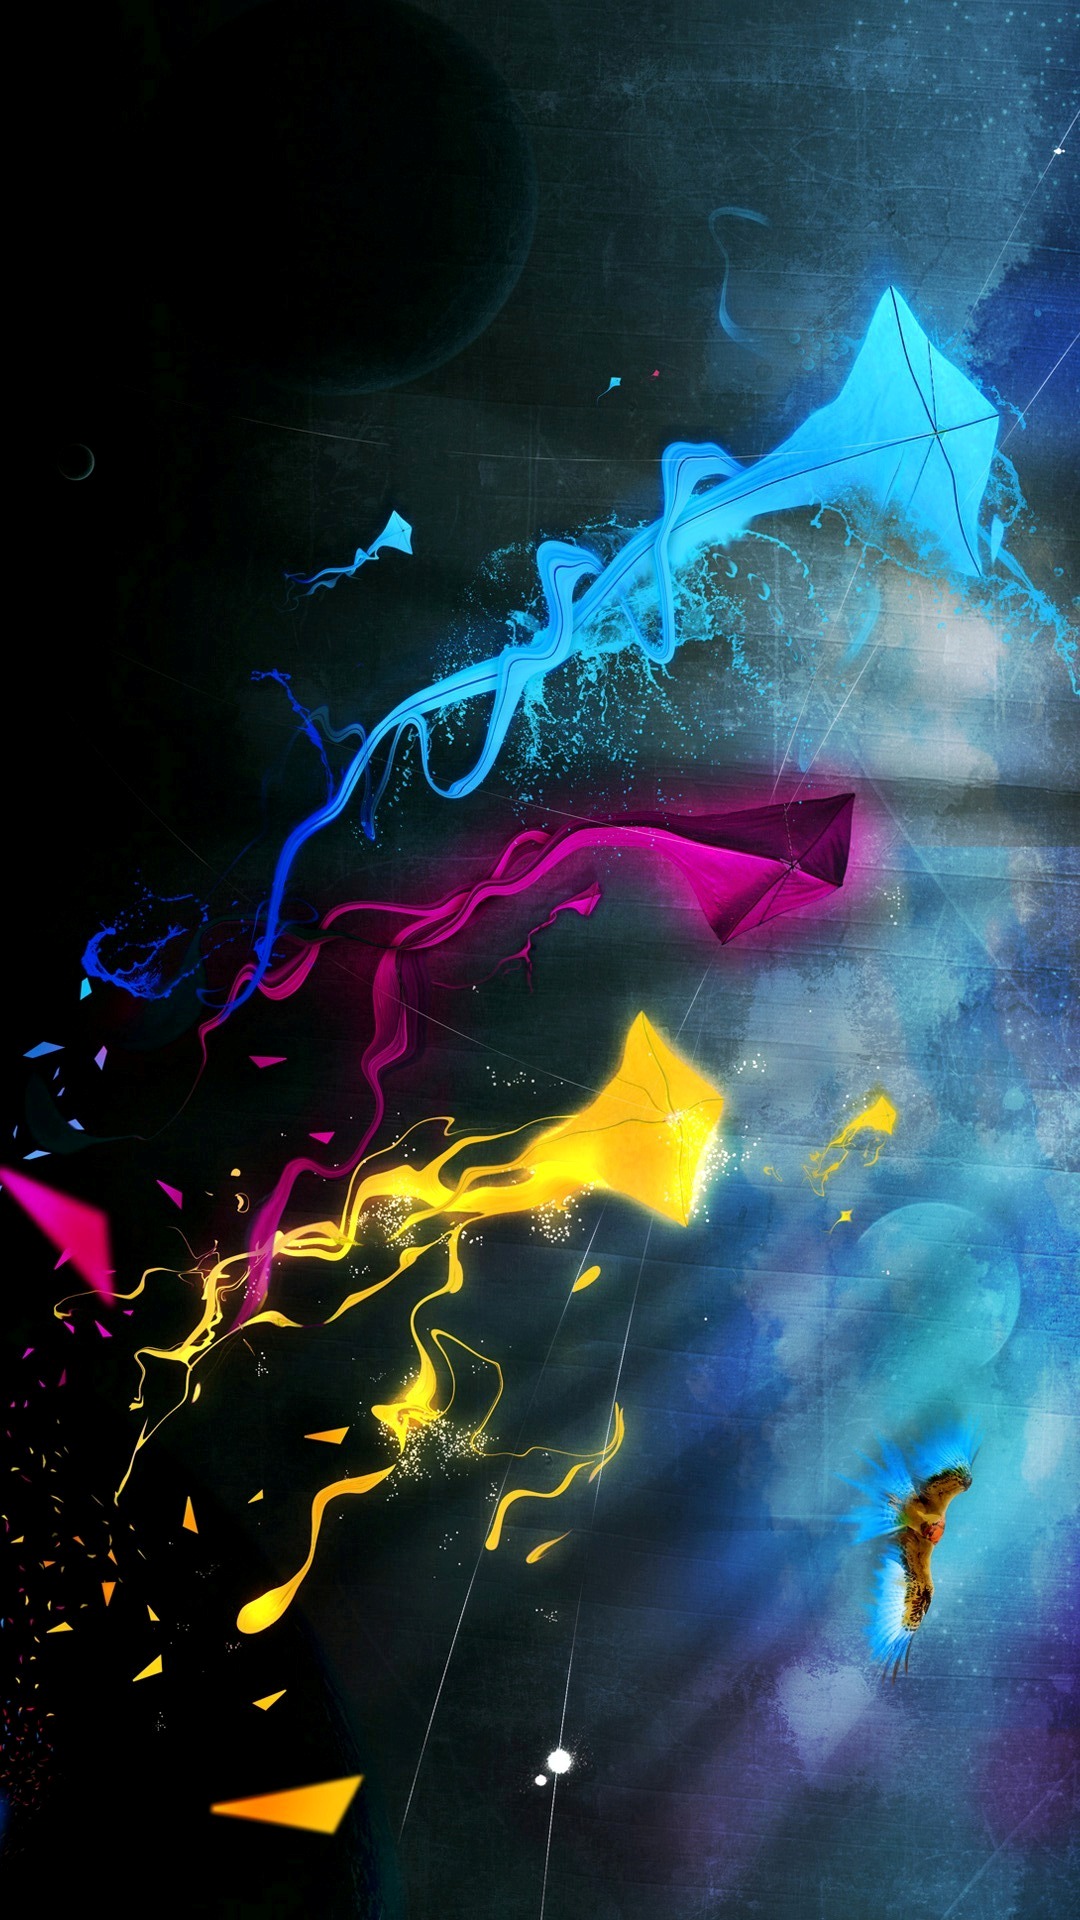 Color Phone Wallpapers